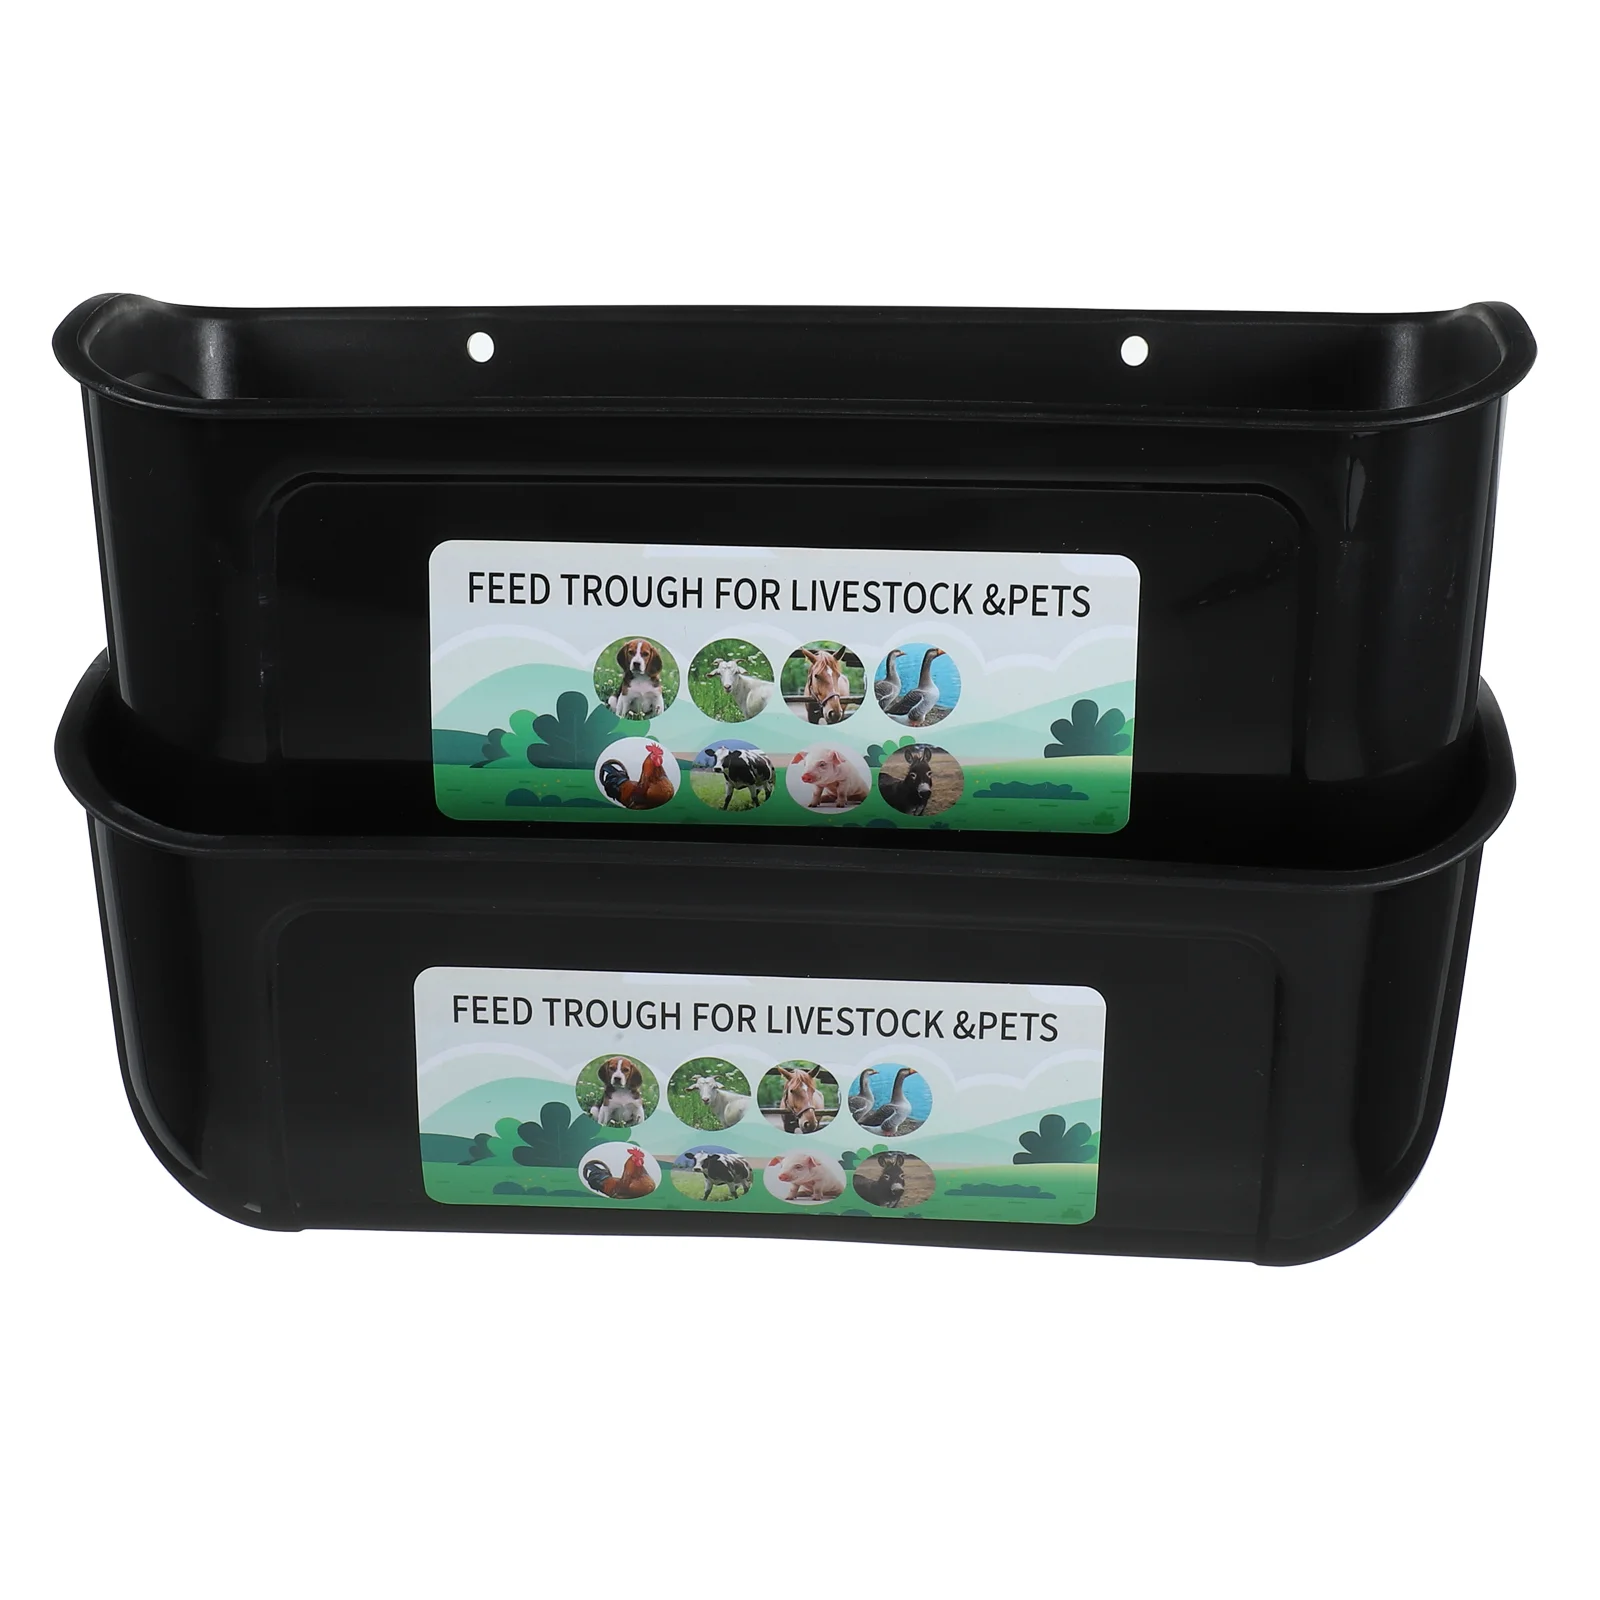 

2 Pcs Food Horse Feed Bucket Chicken Supplies Your Chickens Manger Poultry Feeder Trough Birds Feeding Groove